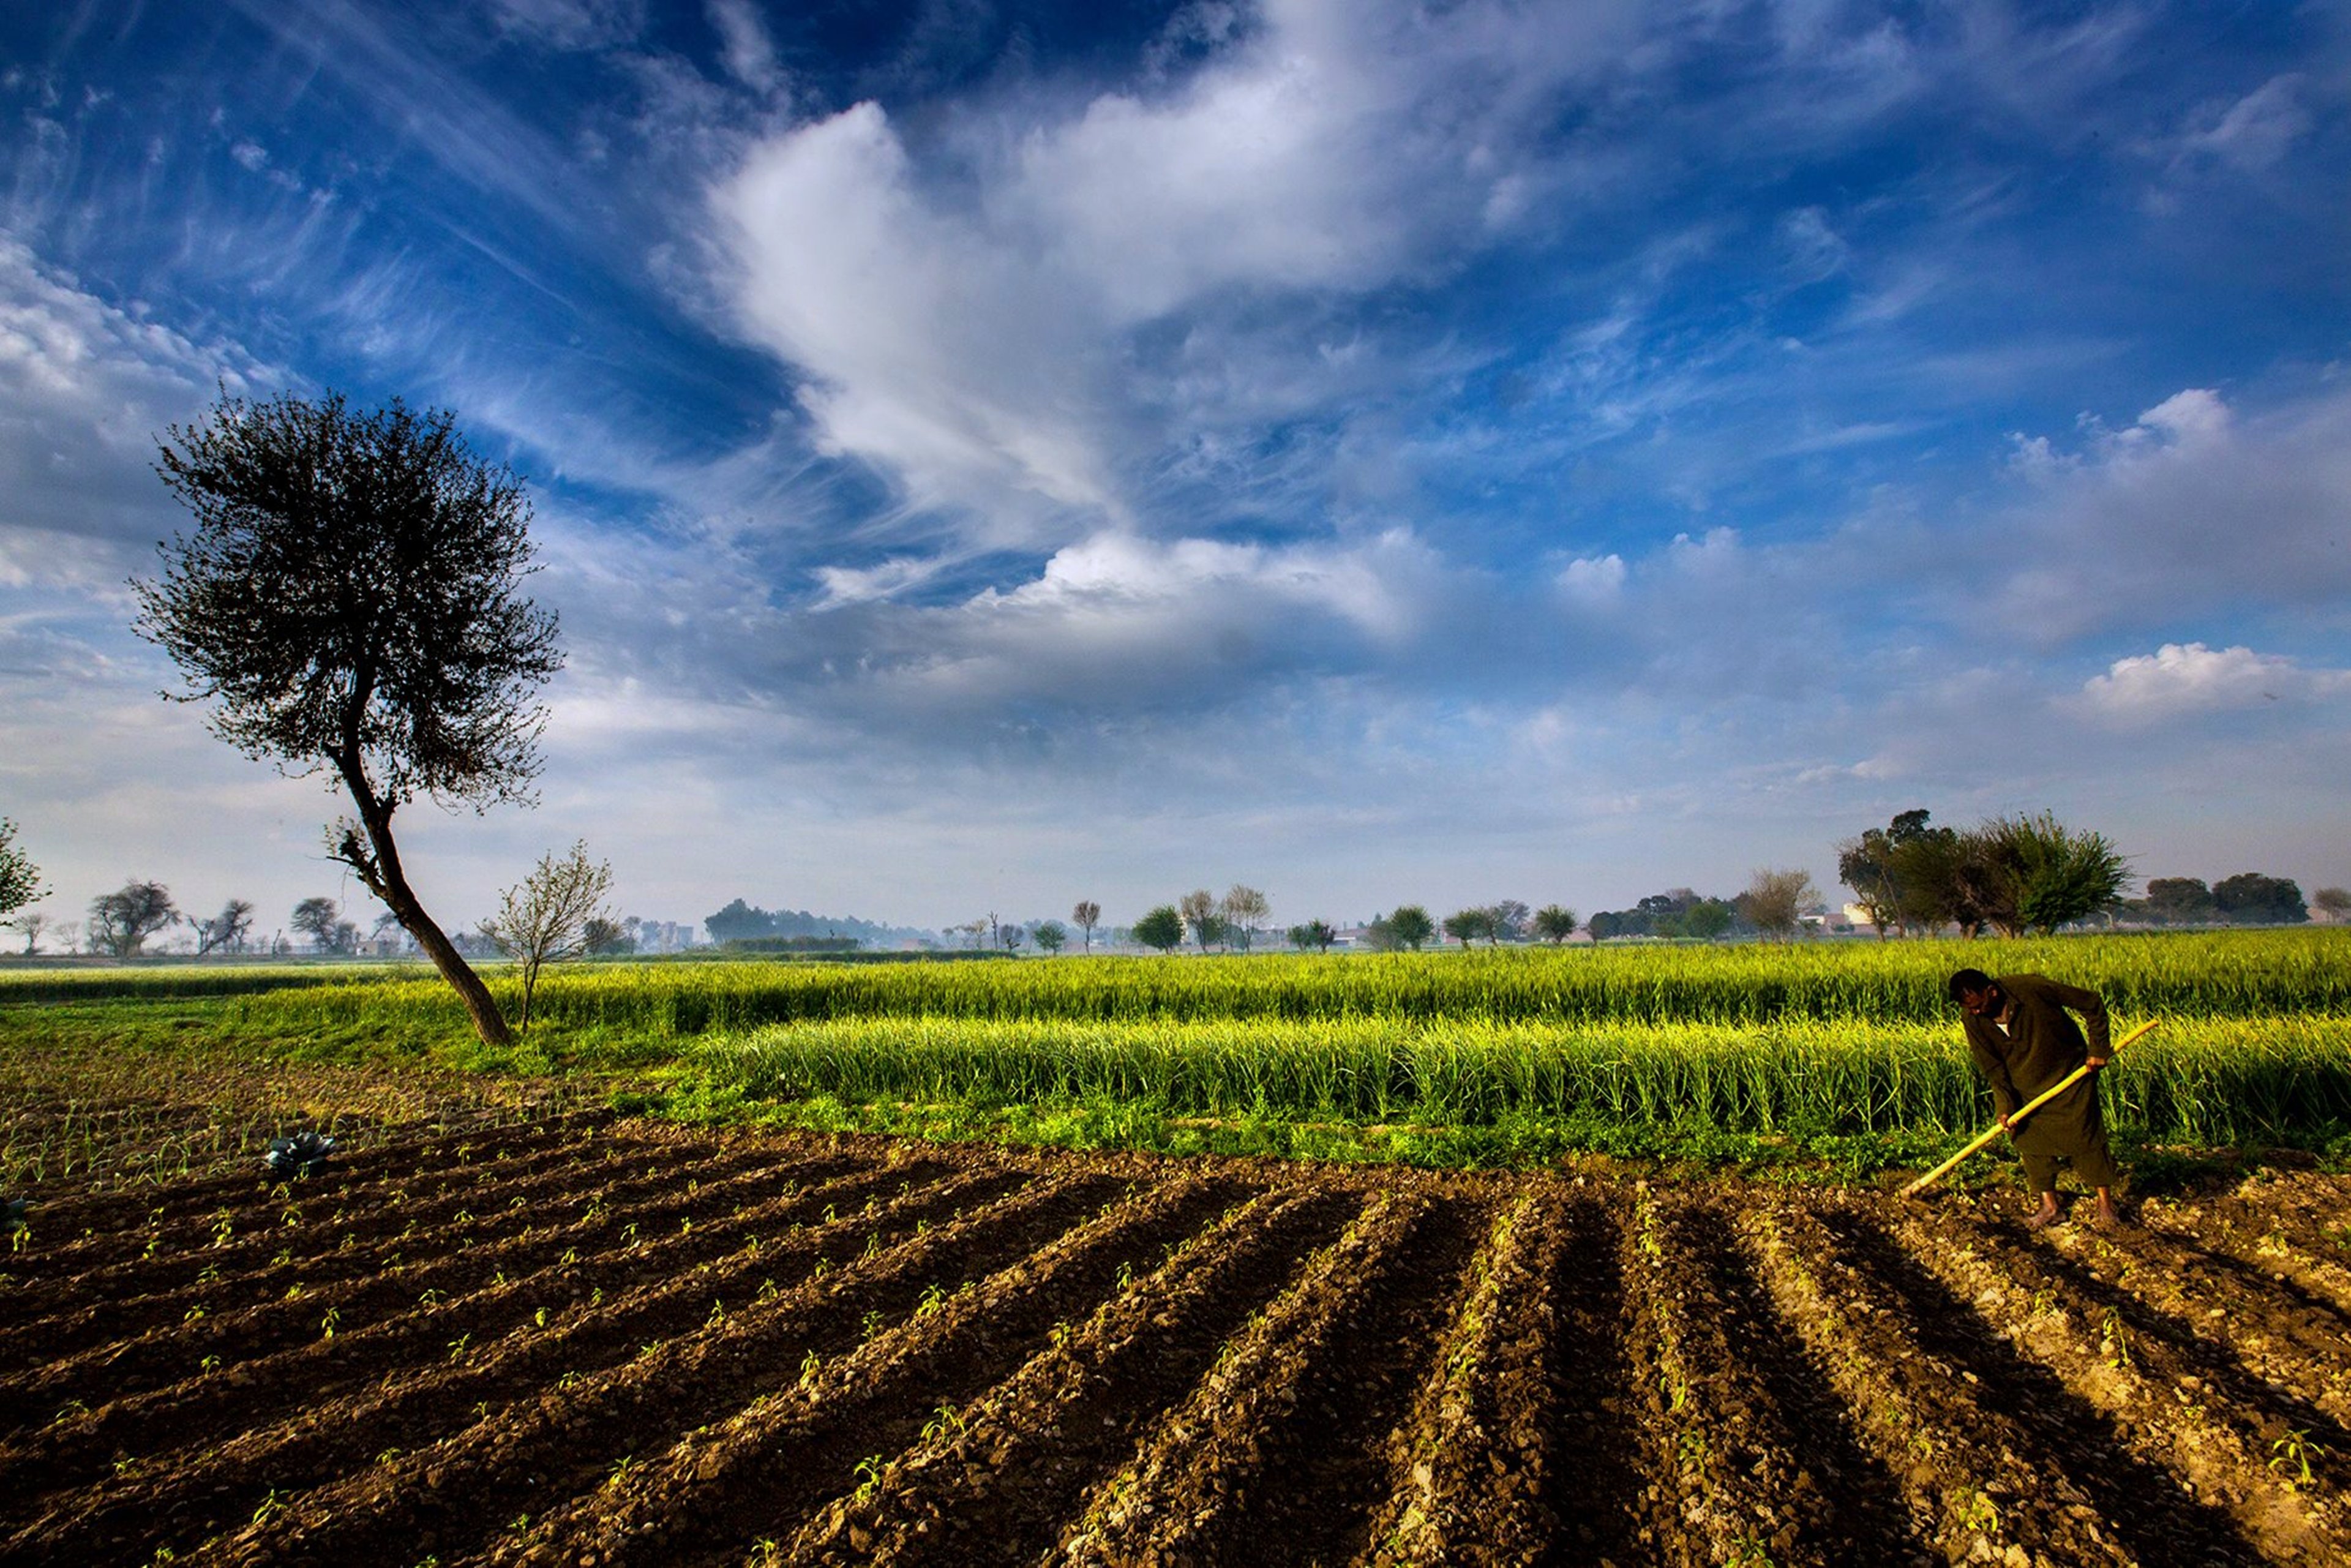 pakistan, Landscapes, Man, Farmer, Agriculture, Clouds, Sky, Trees, Fog, Nature, Countryside, Grass, Plowing Wallpaper